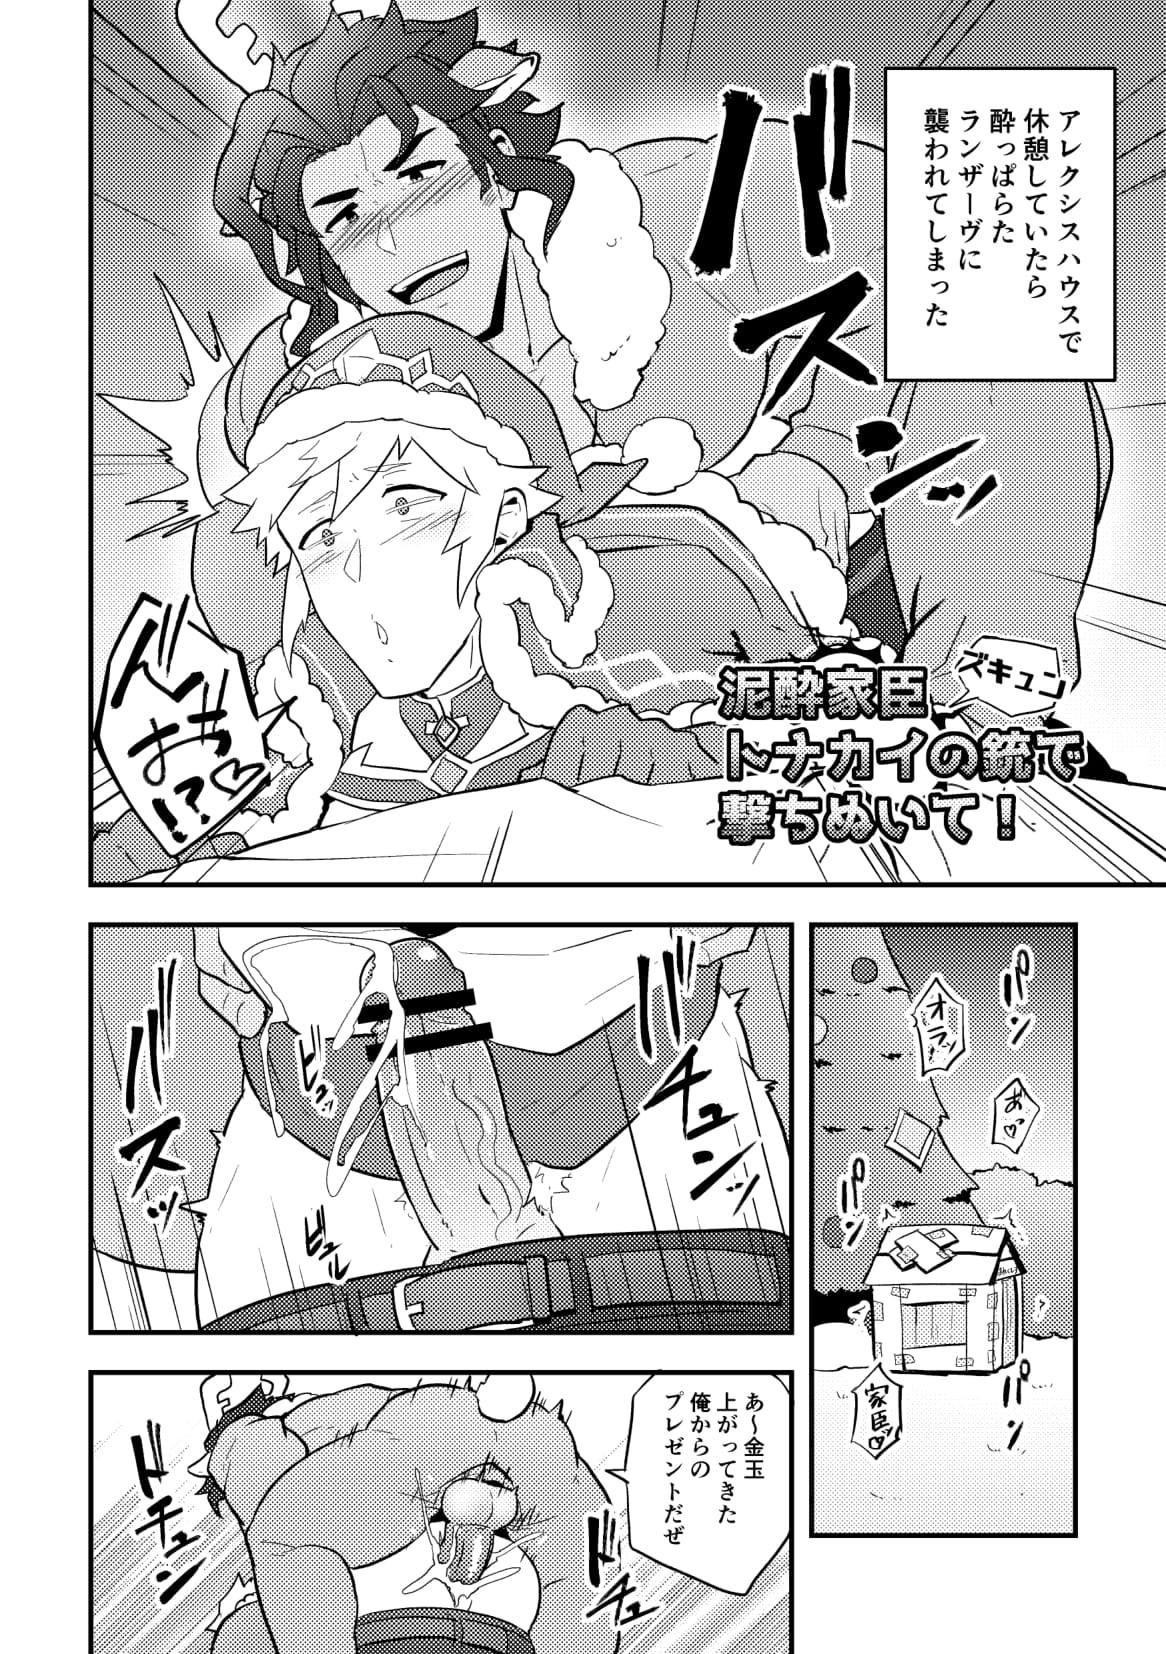 Transvestite Onabe Hon C95 - The idolmaster Fate grand order Granblue fantasy Pokemon Fire emblem Castlevania Dragalia lost Punch-out Girl Girl - Page 6